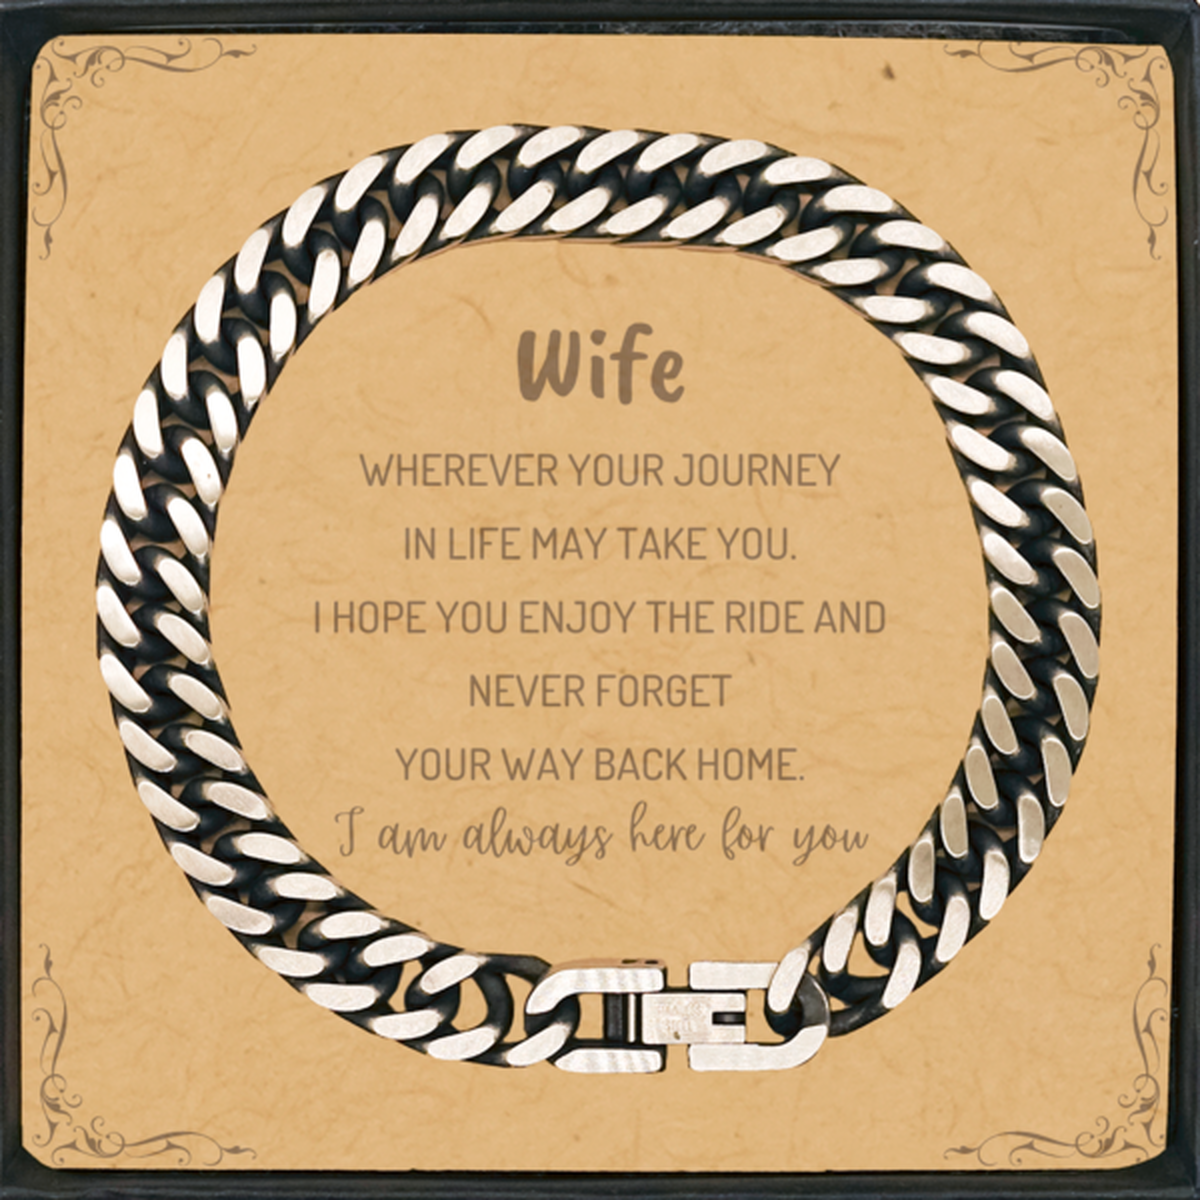 Wife wherever your journey in life may take you, I am always here for you Wife Cuban Link Chain Bracelet, Awesome Christmas Gifts For Wife Message Card, Wife Birthday Gifts for Men Women Family Loved One